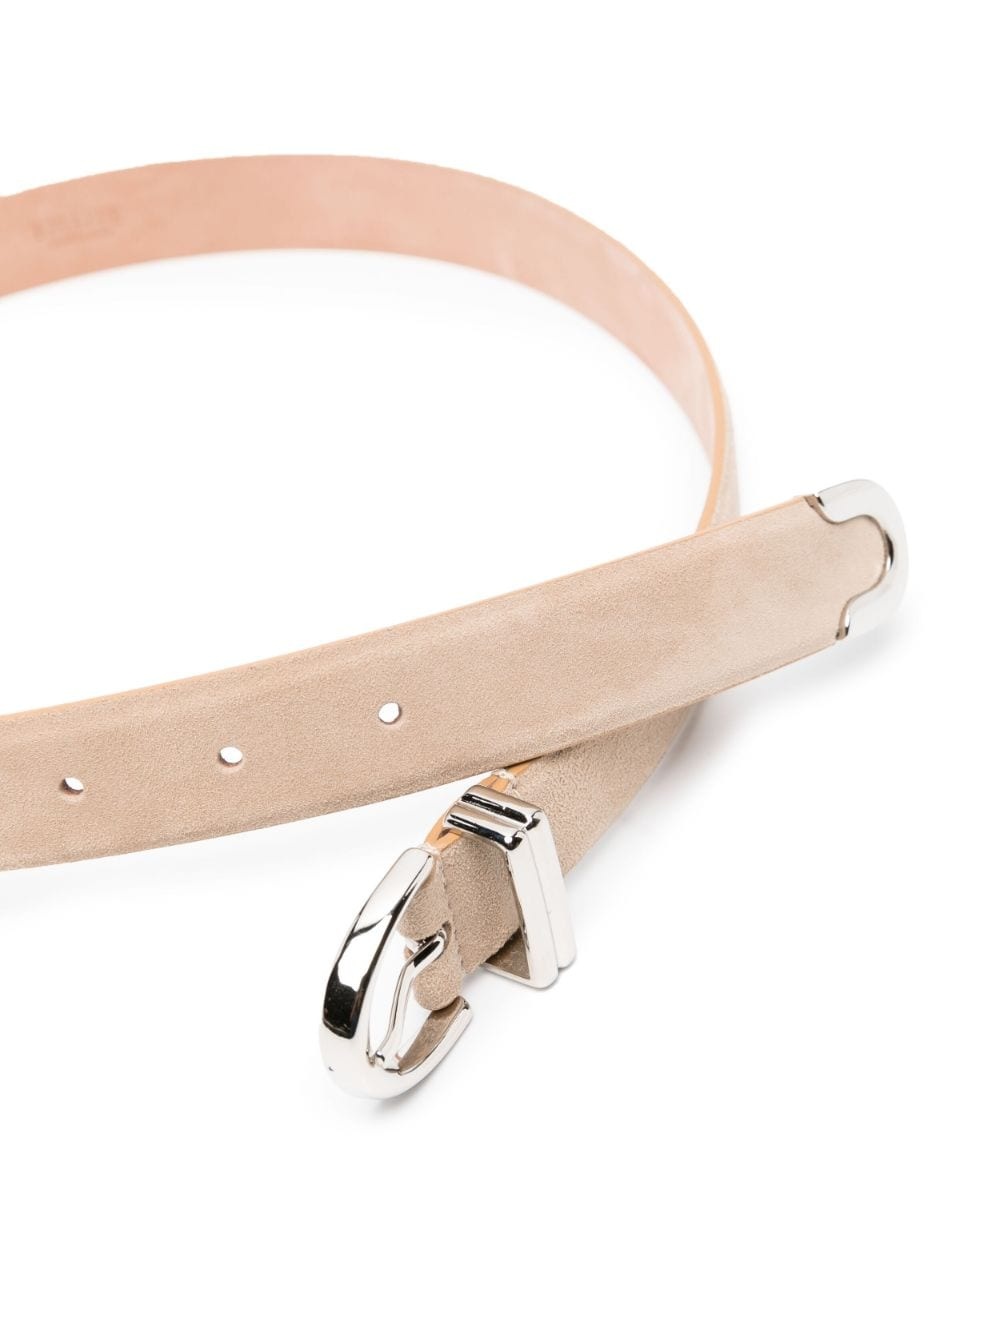 The Bambi suede belt - 2